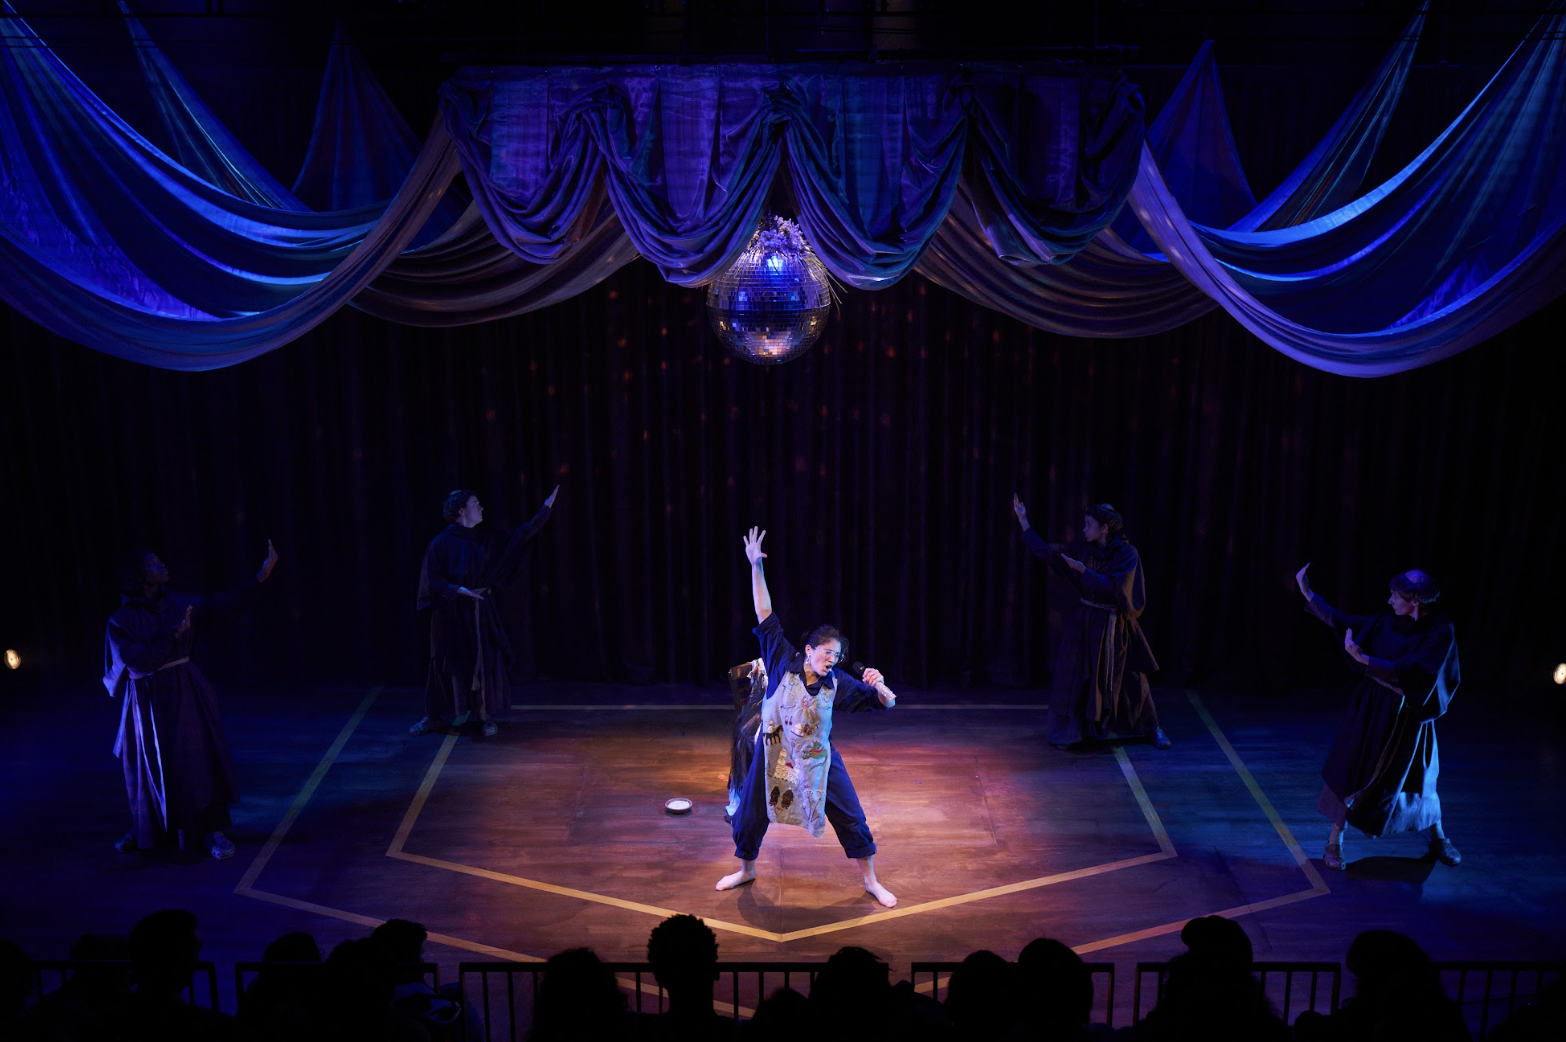 An actor singing into a microphone with one hand in the air under a disco ball surrounded by actors on the edges of the stage holding their arms up